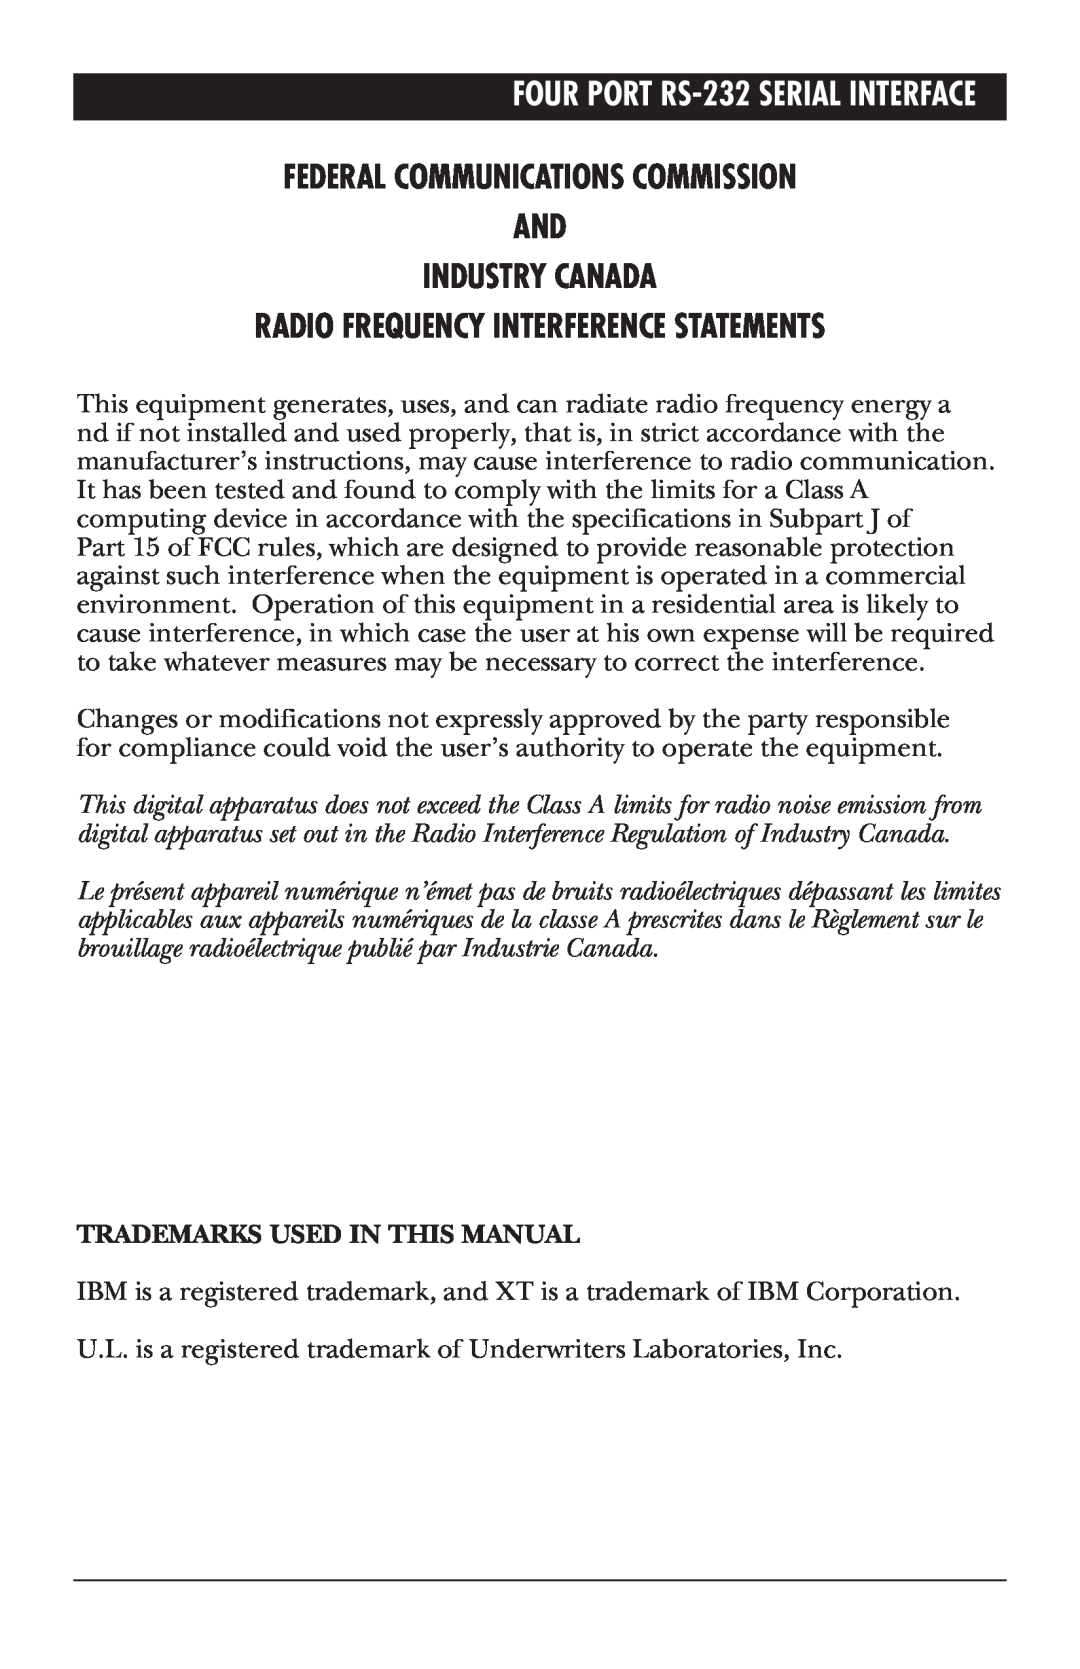 Black Box RS-232, IC181C Federal Communications Commission And Industry Canada, Radio Frequency Interference Statements 